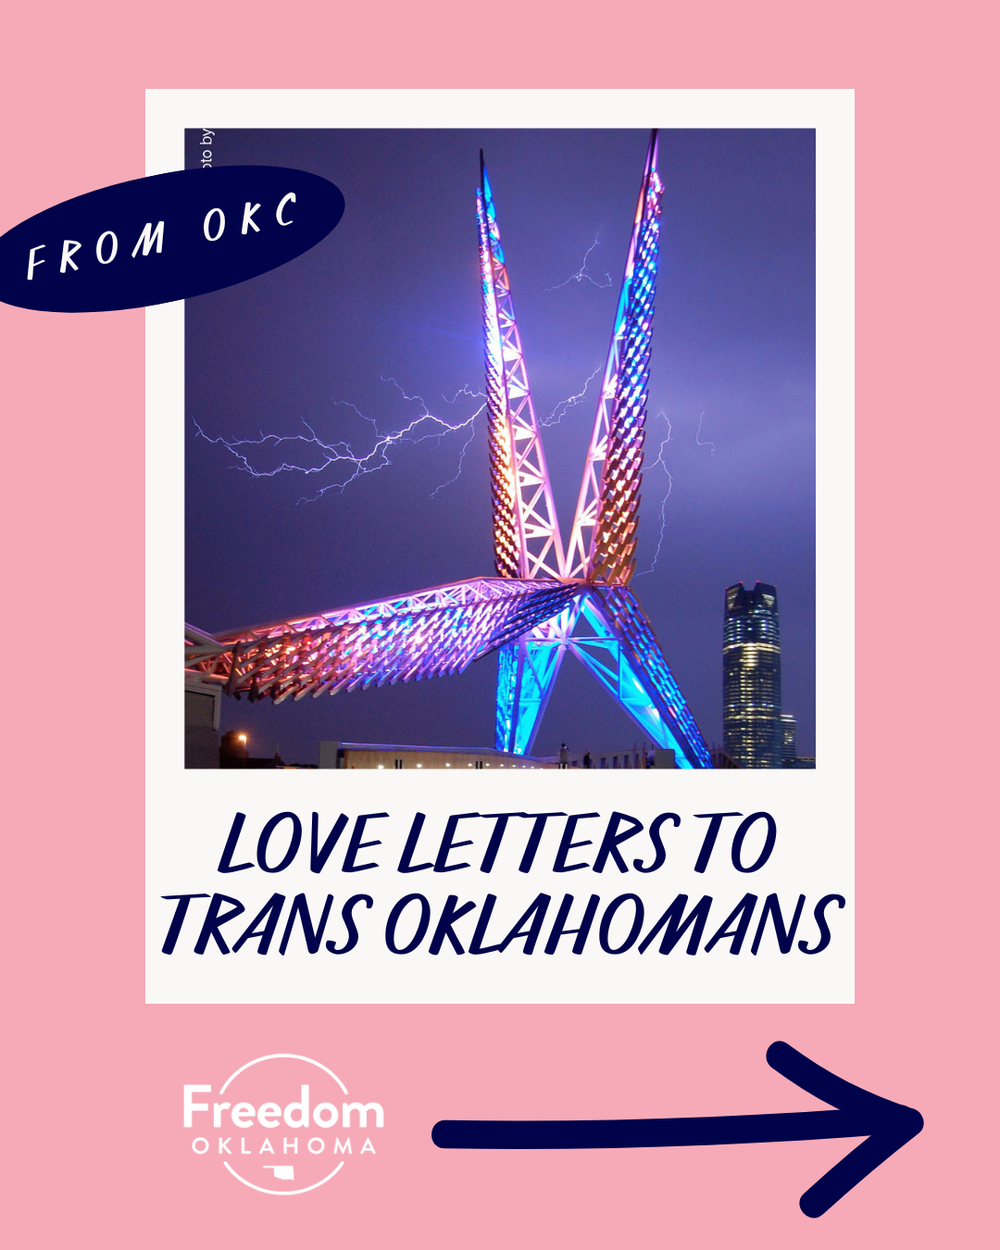  "Love Letters to Trans Oklahomans from OKC" on a pink background. In the center is a Polaroid of the OKC Skydance Bridge lit up with blue and pink lights. A blue arrow points to the right to suggest swiping right. 